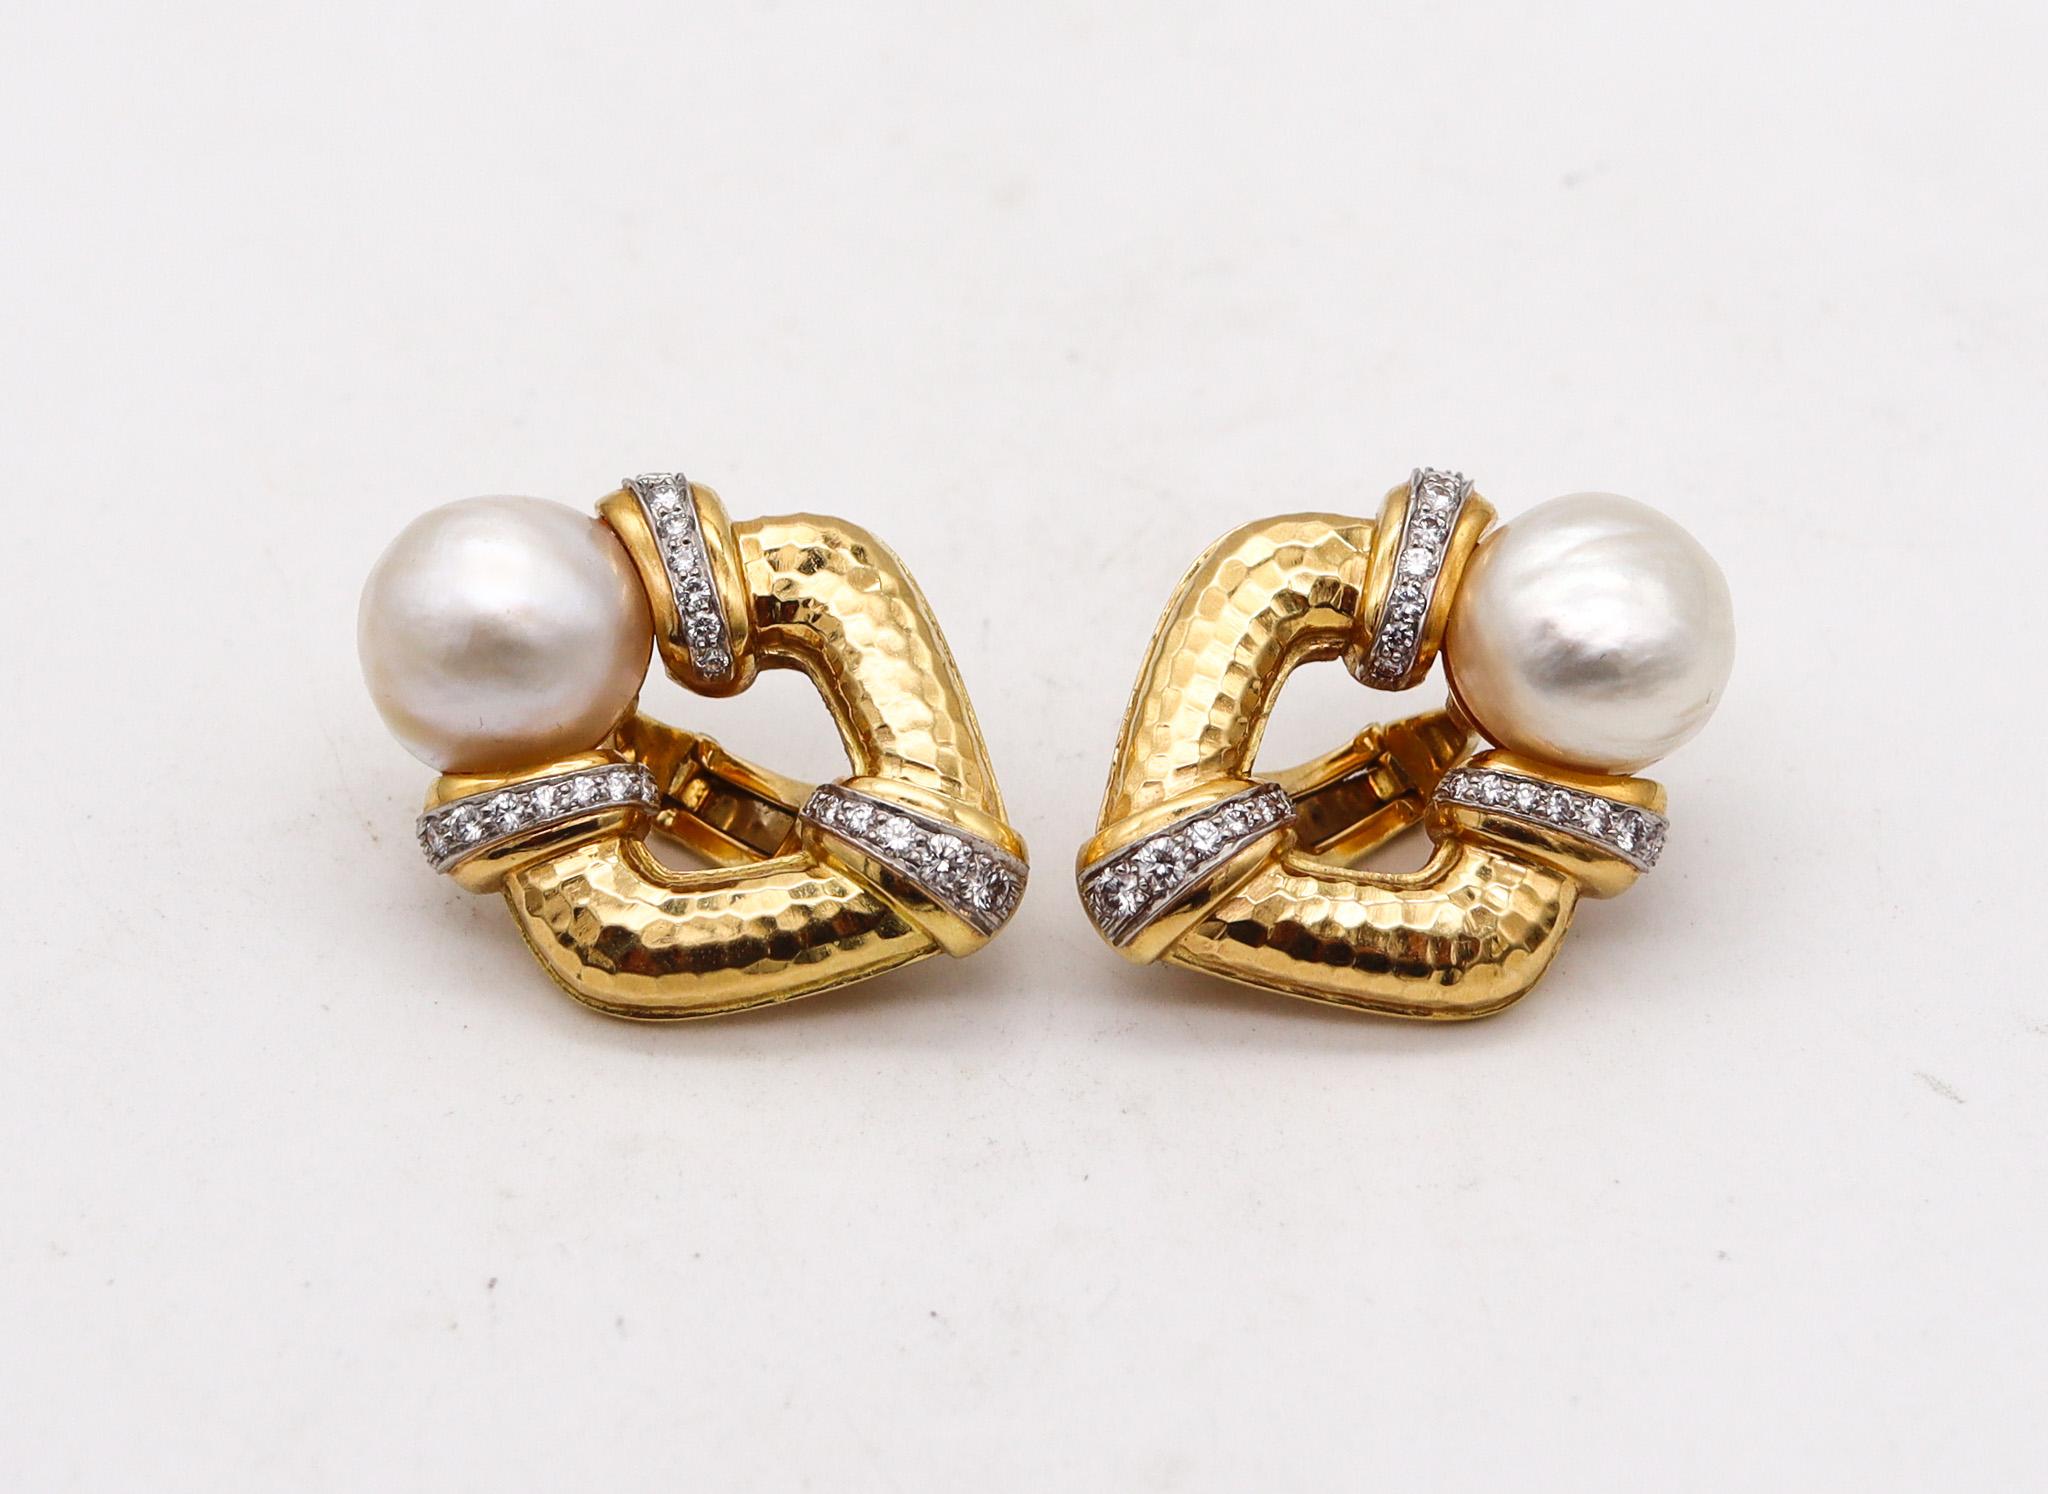 Clip on earrings designed by Andrew Clunn.

Great pair of ear-clips, created in New York city at the jewelry atelier of Andrew Clunn. These pieces has been crafted with hammered patterns in solid rich yellow gold of 18 karats with high polished